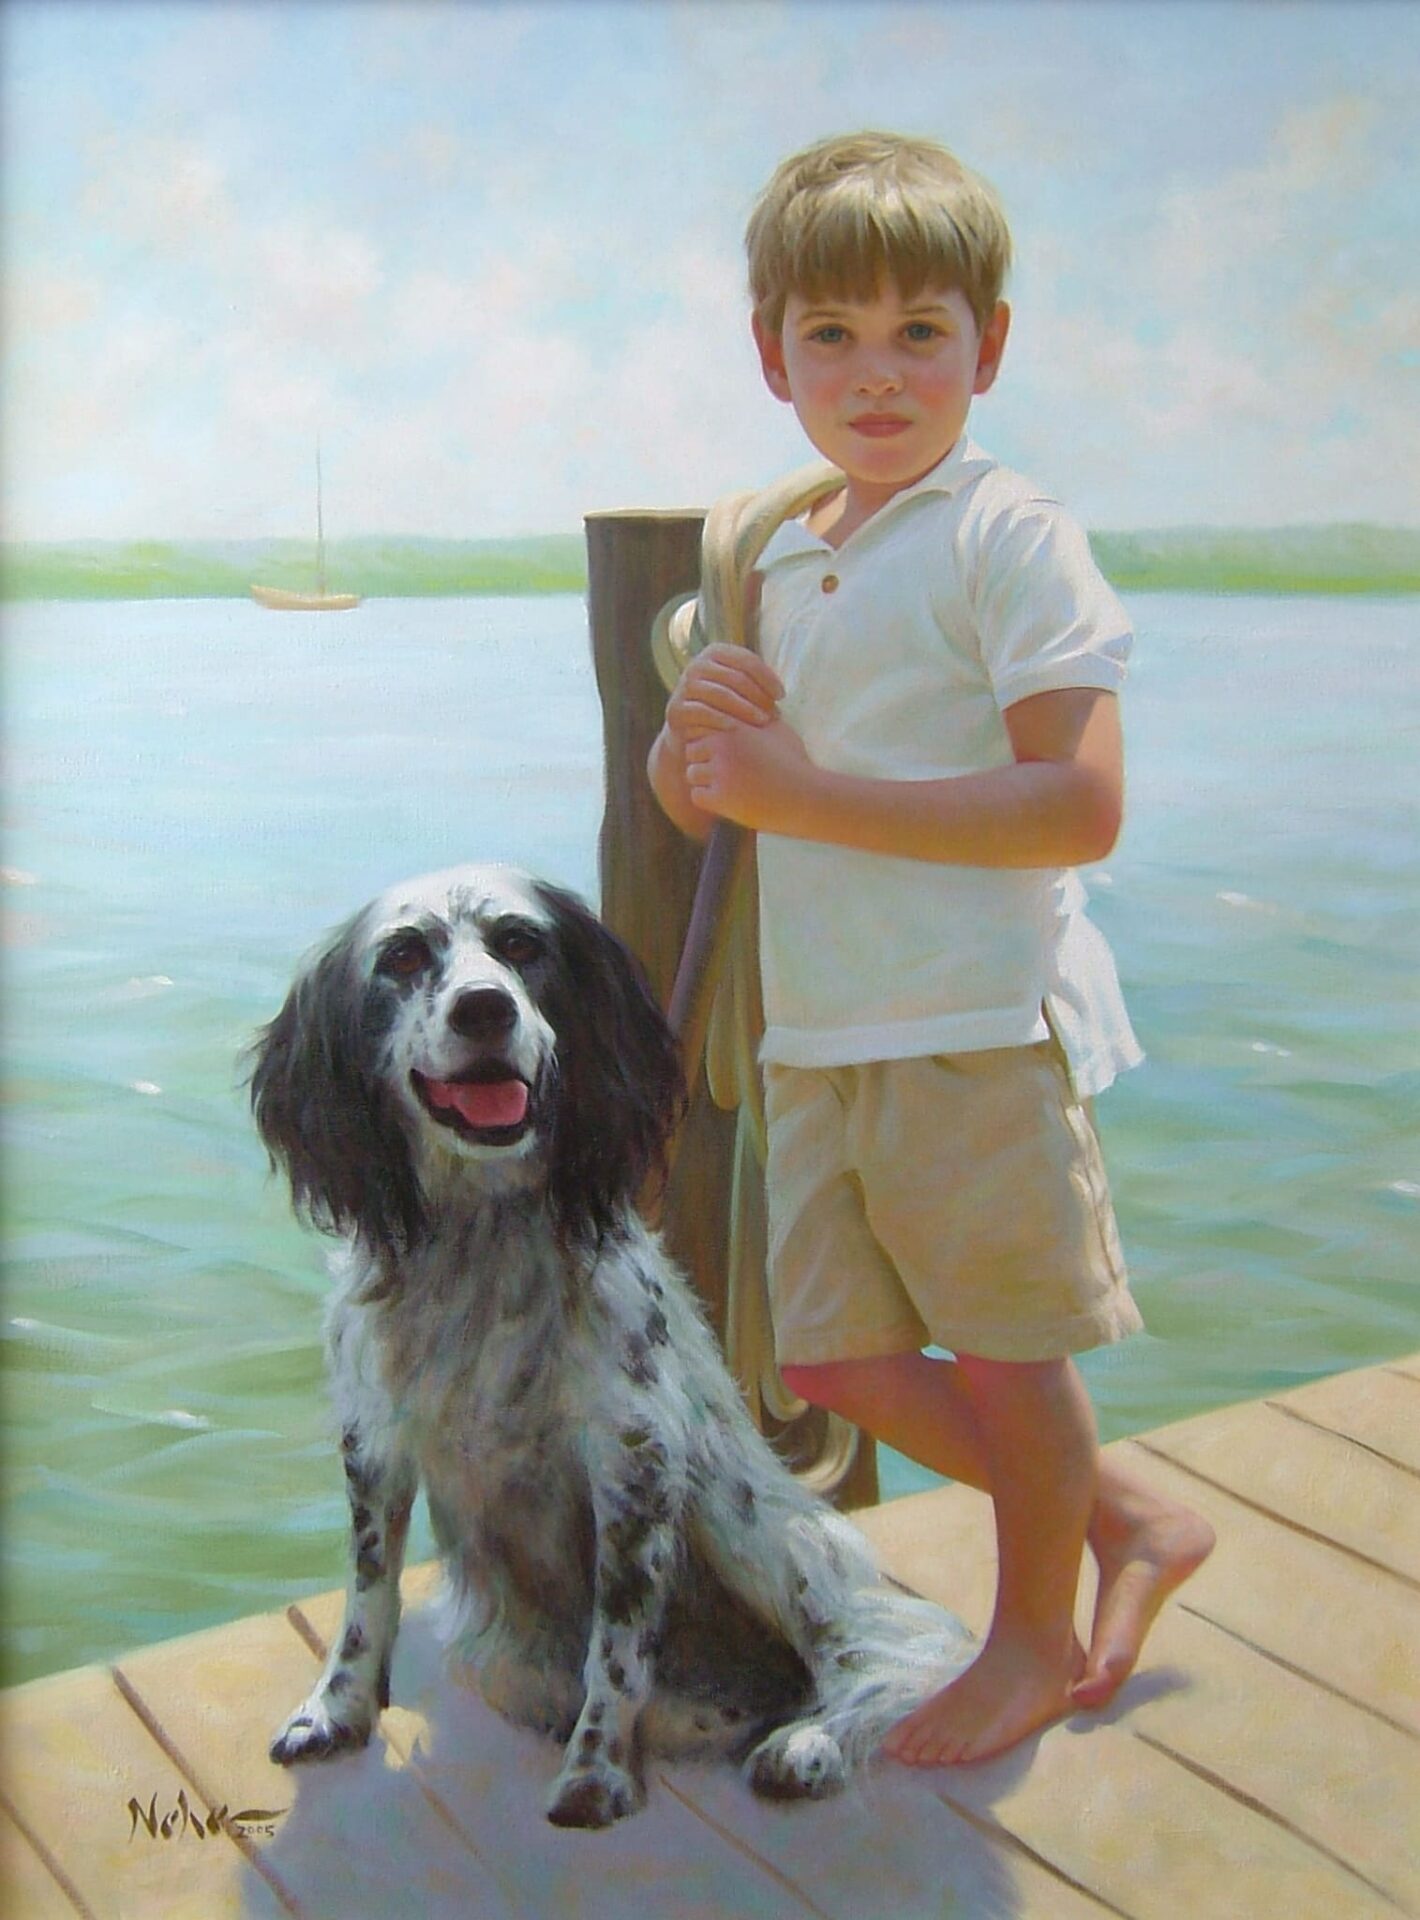 A portrait painting of Rowdy and his dog